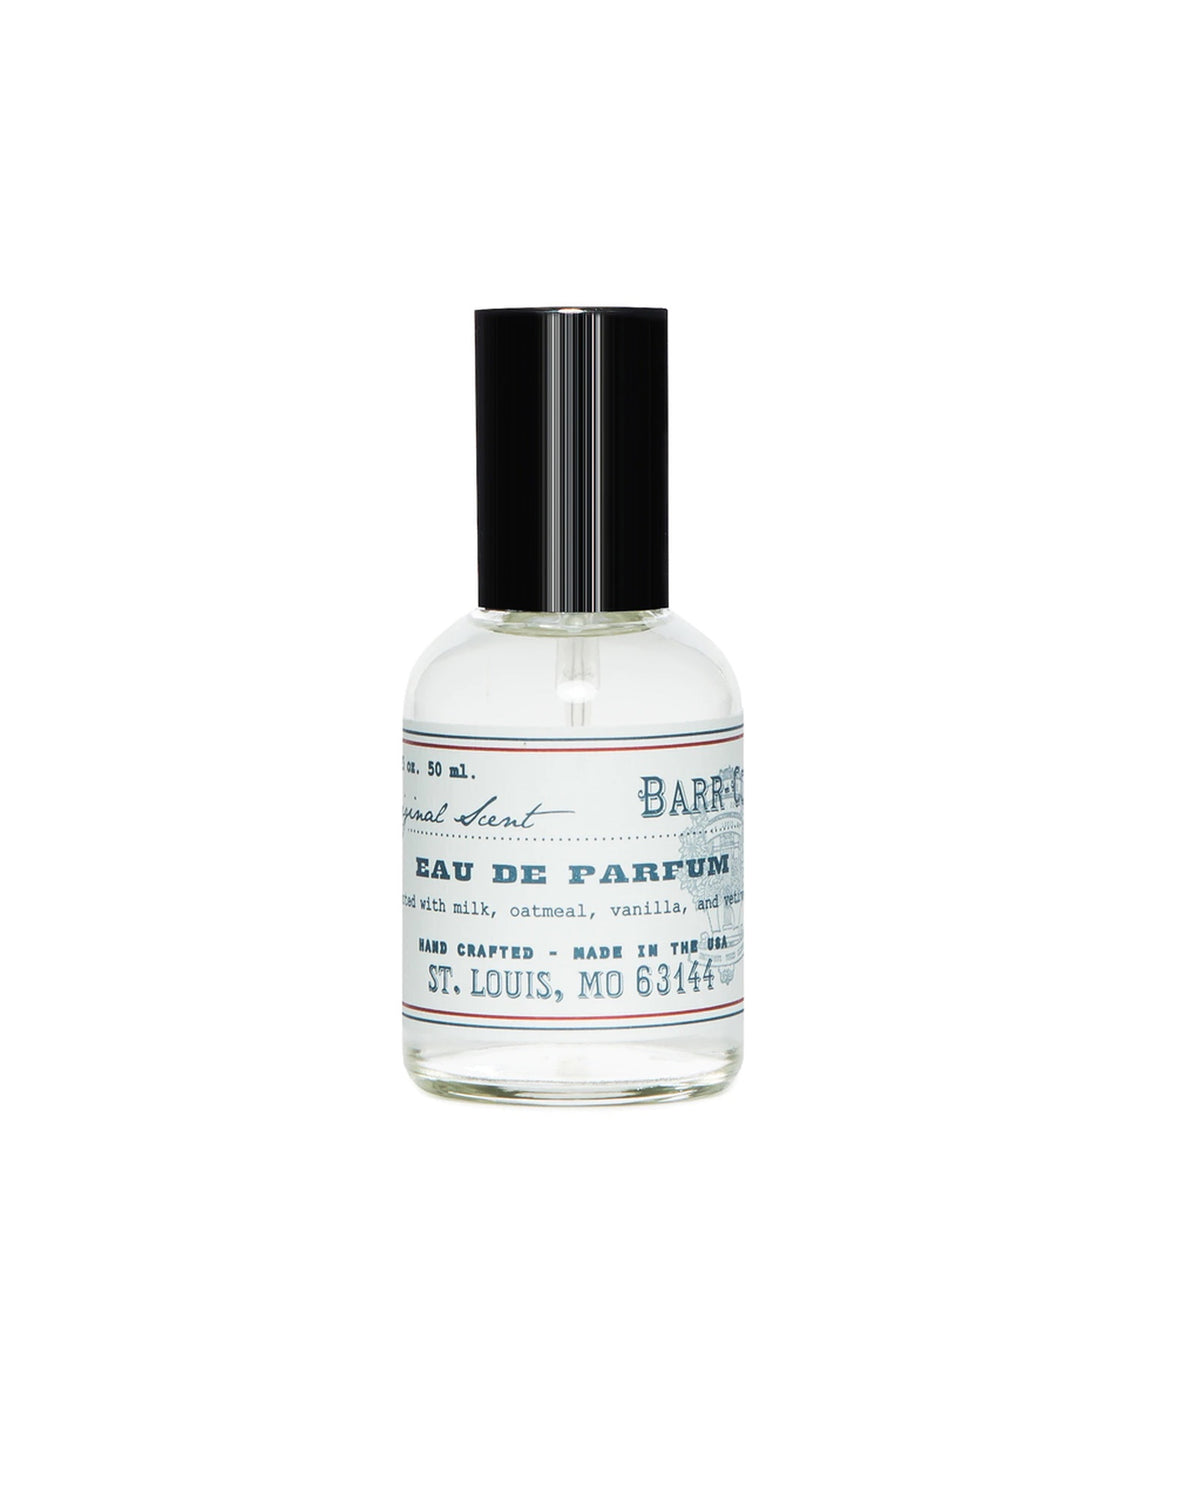 A clear glass bottle of Barr-Co. Original Scent Eau de Parfum with a black cap and labeled with scent components: musk, citrus, and vanilla. The text specifies it is made in St. Louis, MO.